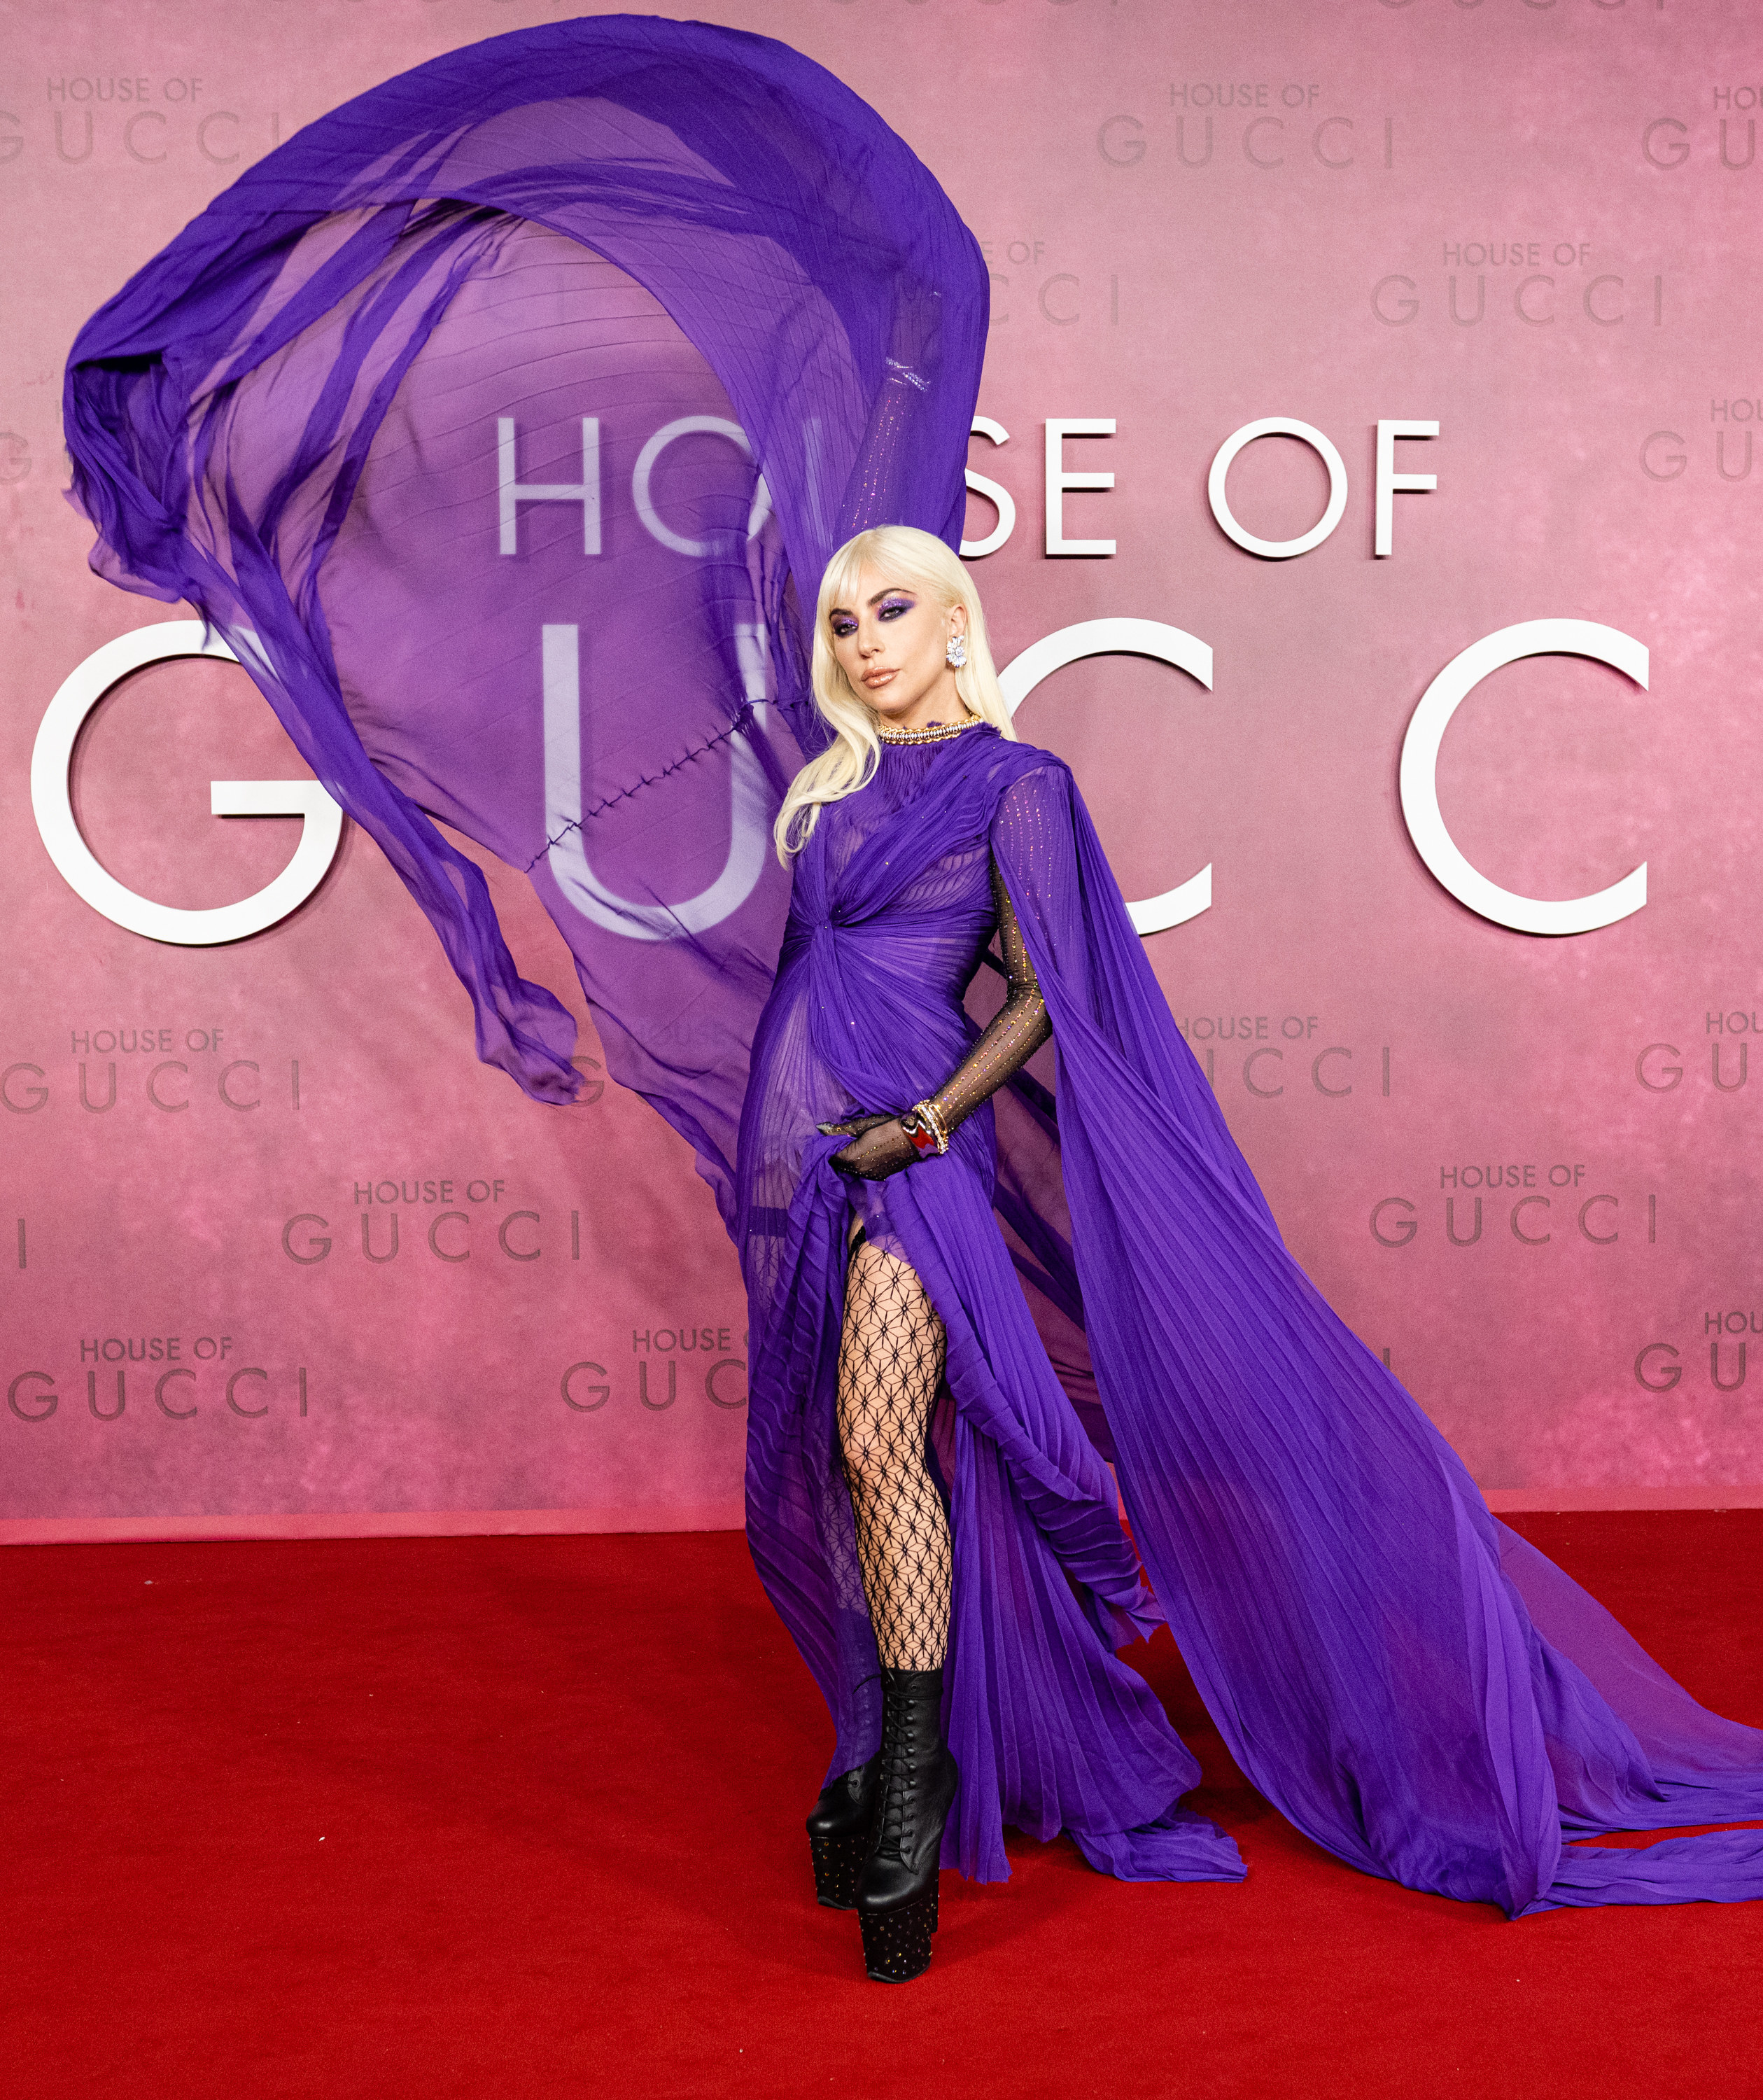 Surprising Things You May Not Know About Lady Gaga